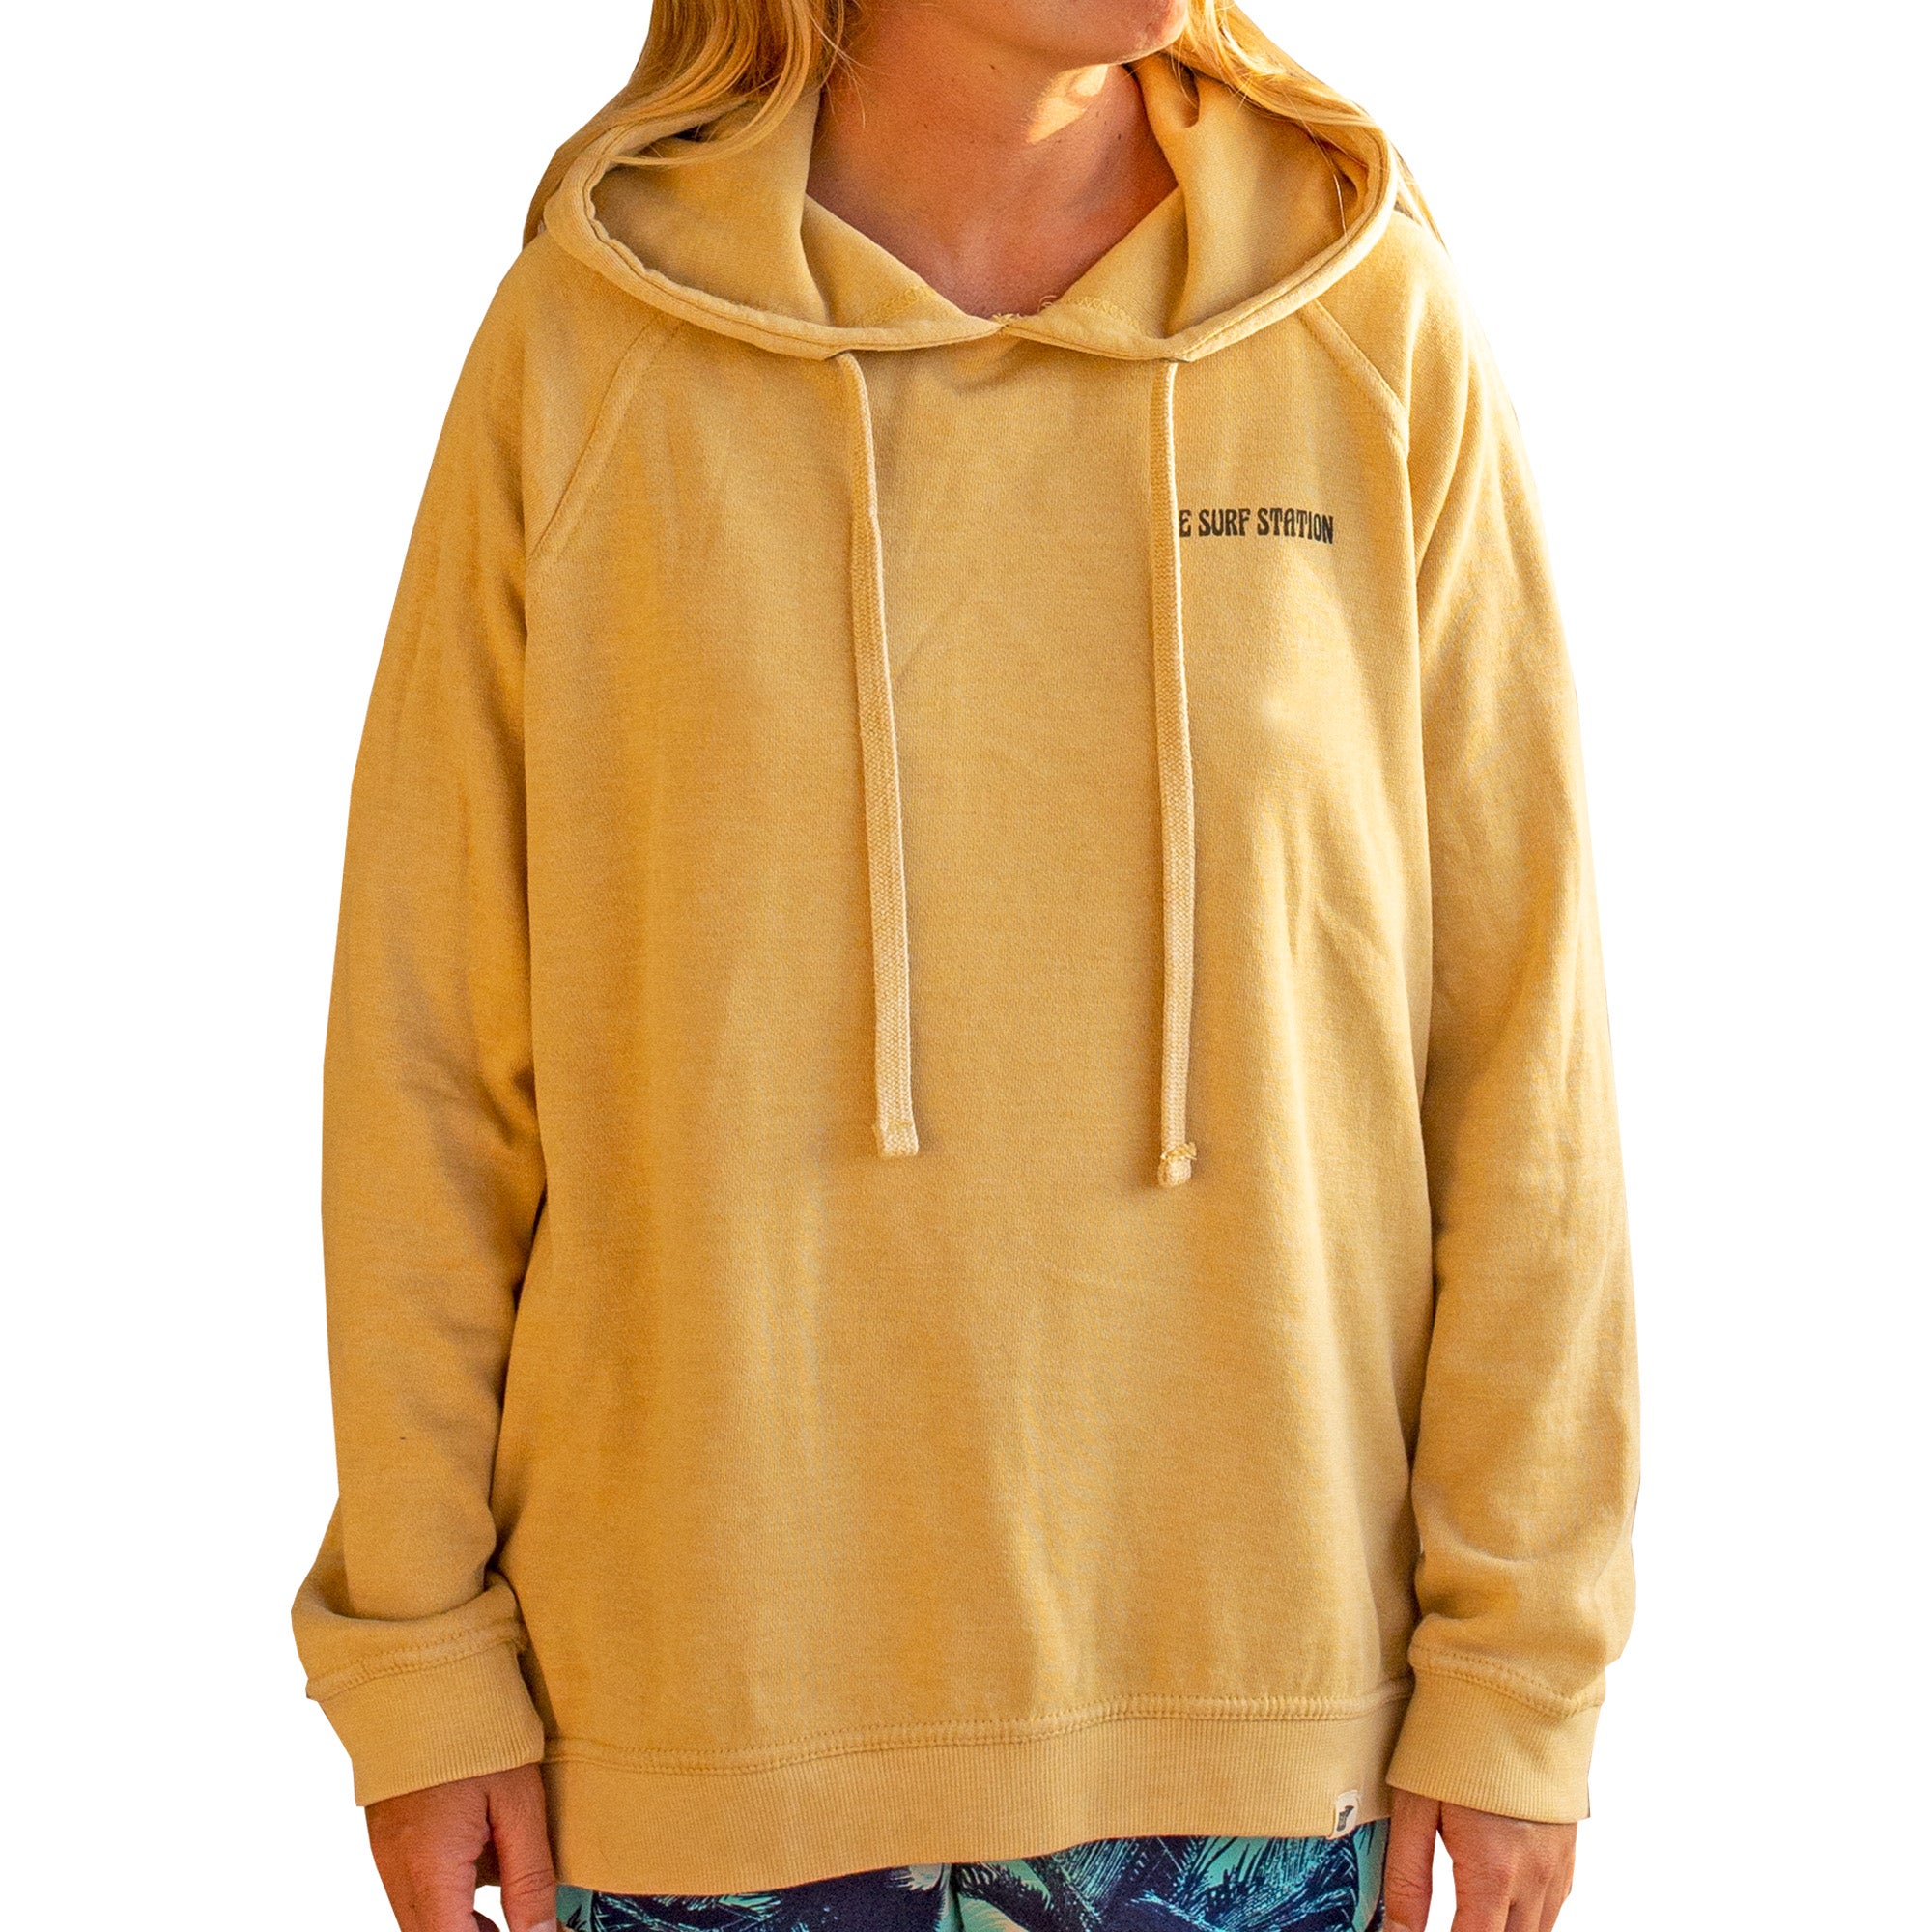 Surf Station Nags Head Women's L/S Hoodie